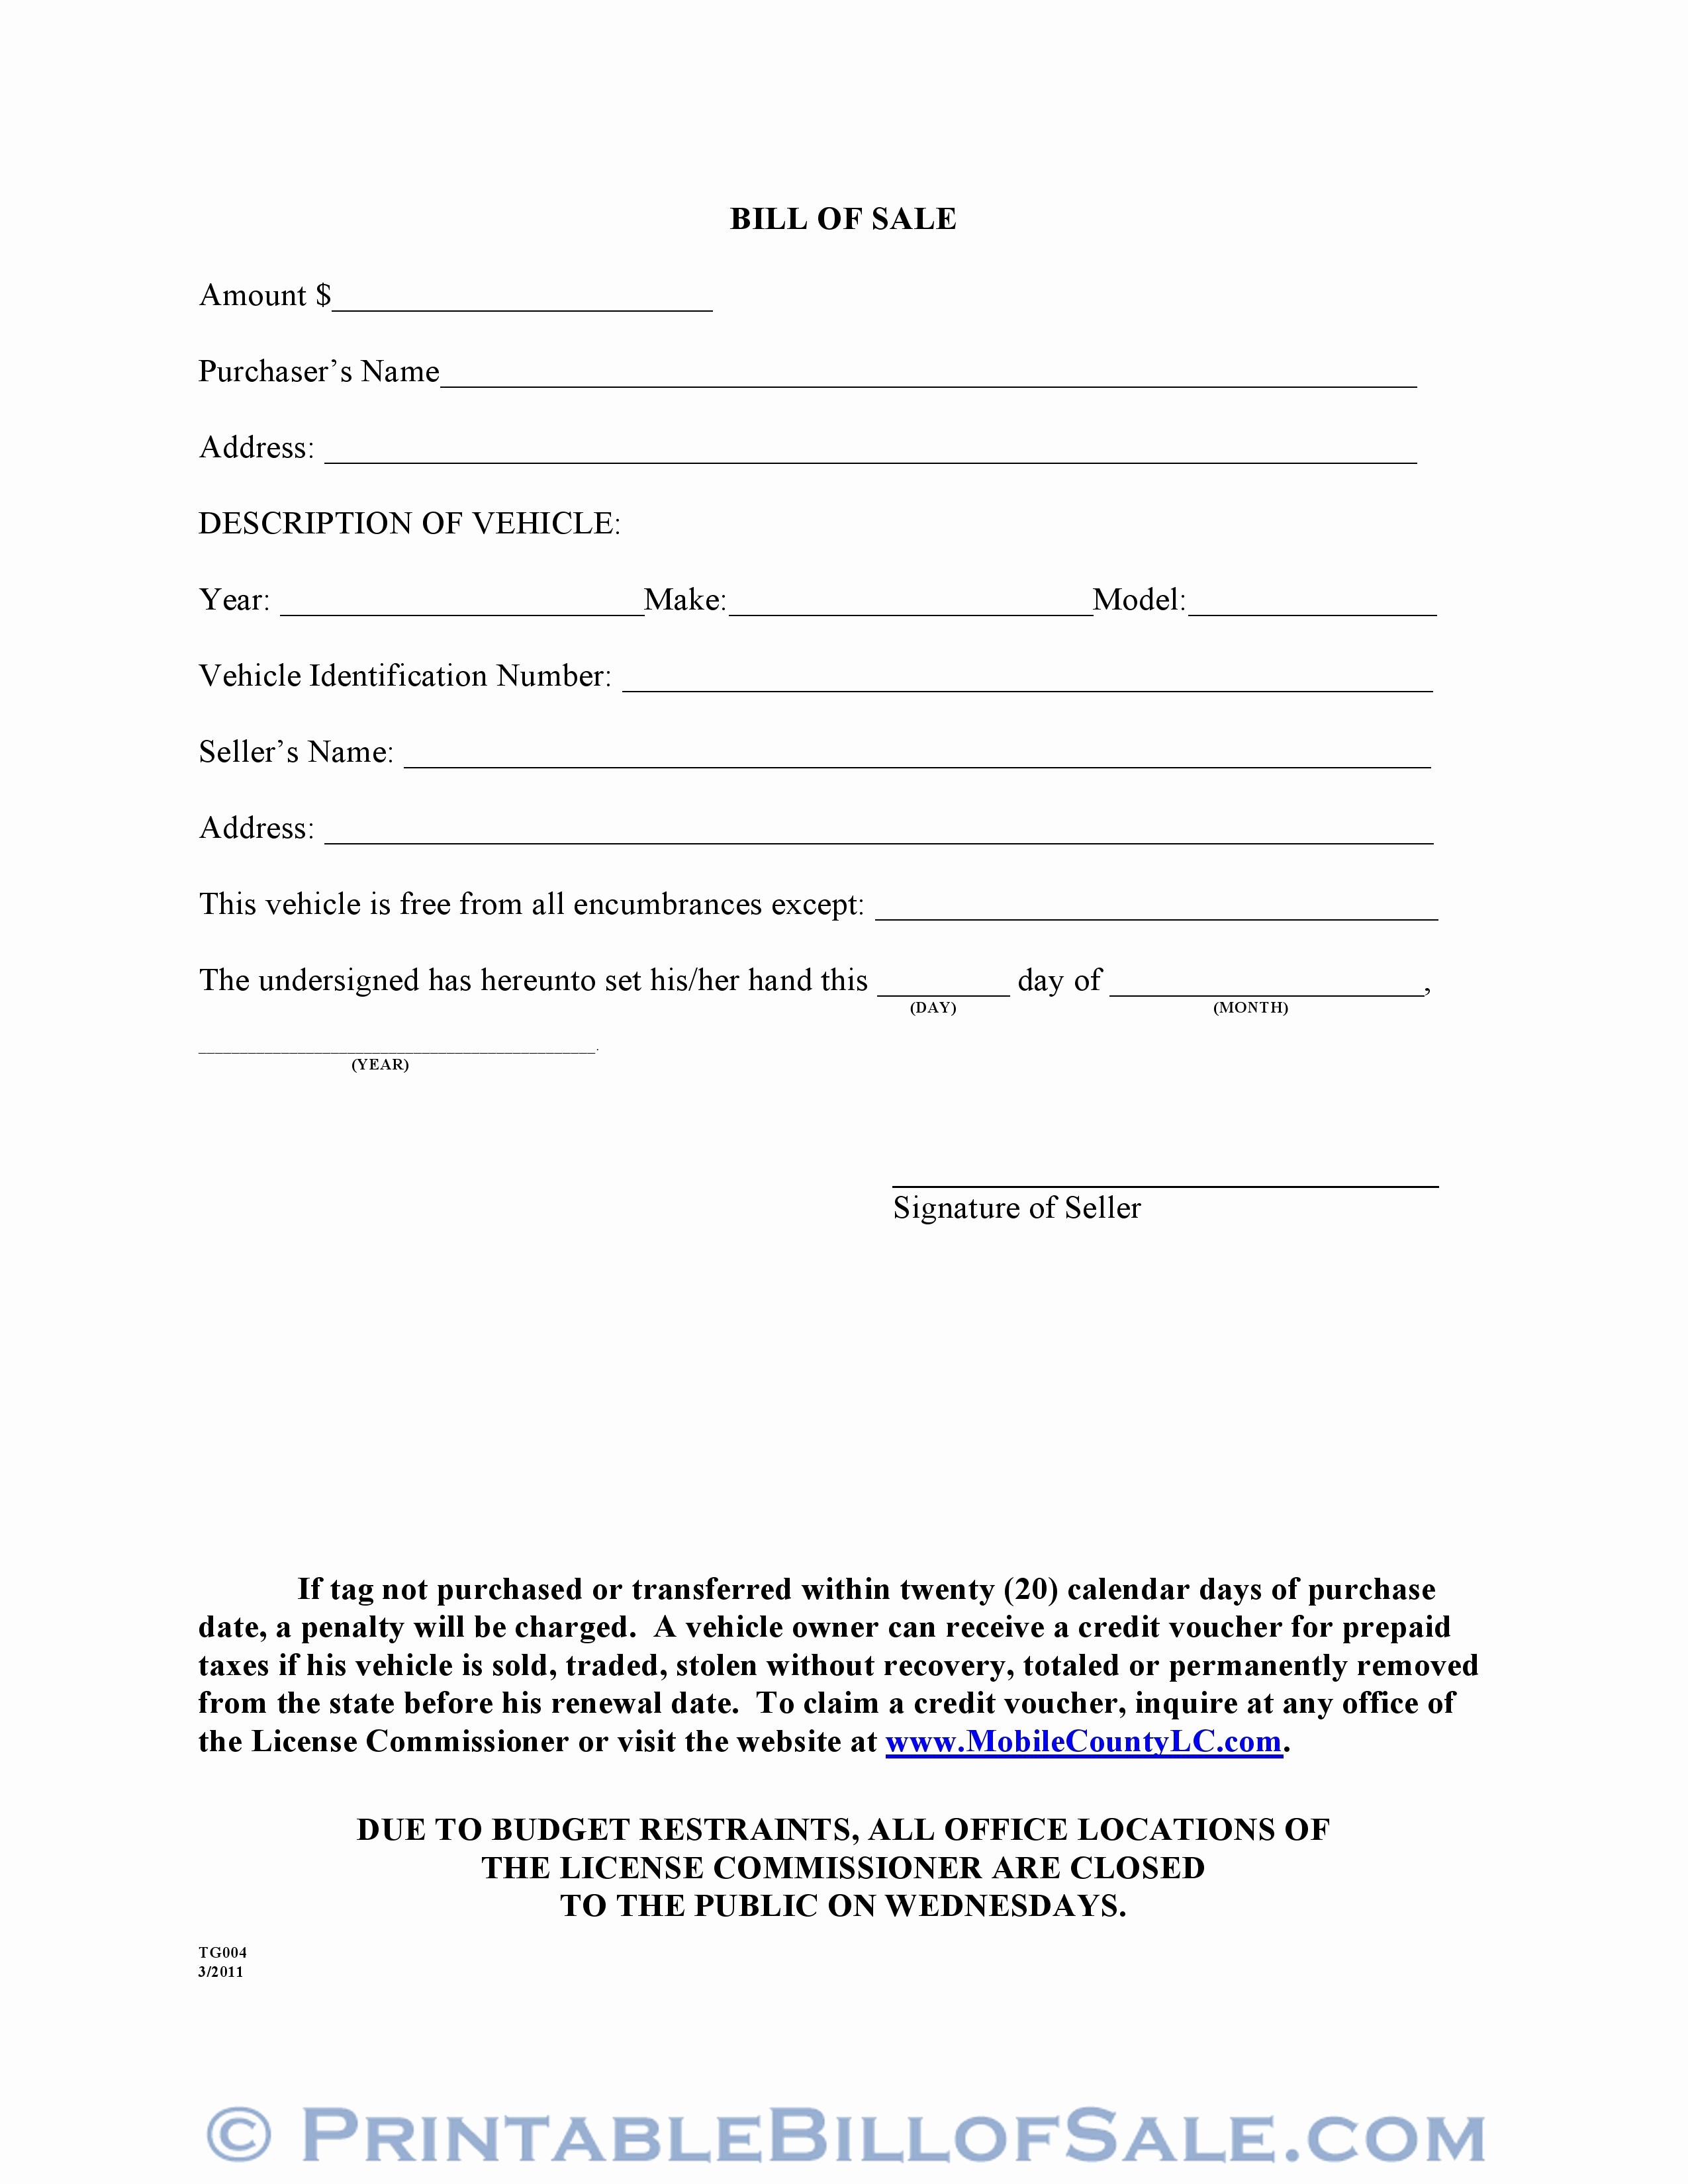 Bill Of Sale Automobile Template Elegant Free Mobile County Alabama Motor Vehicle Bill Of Sale form